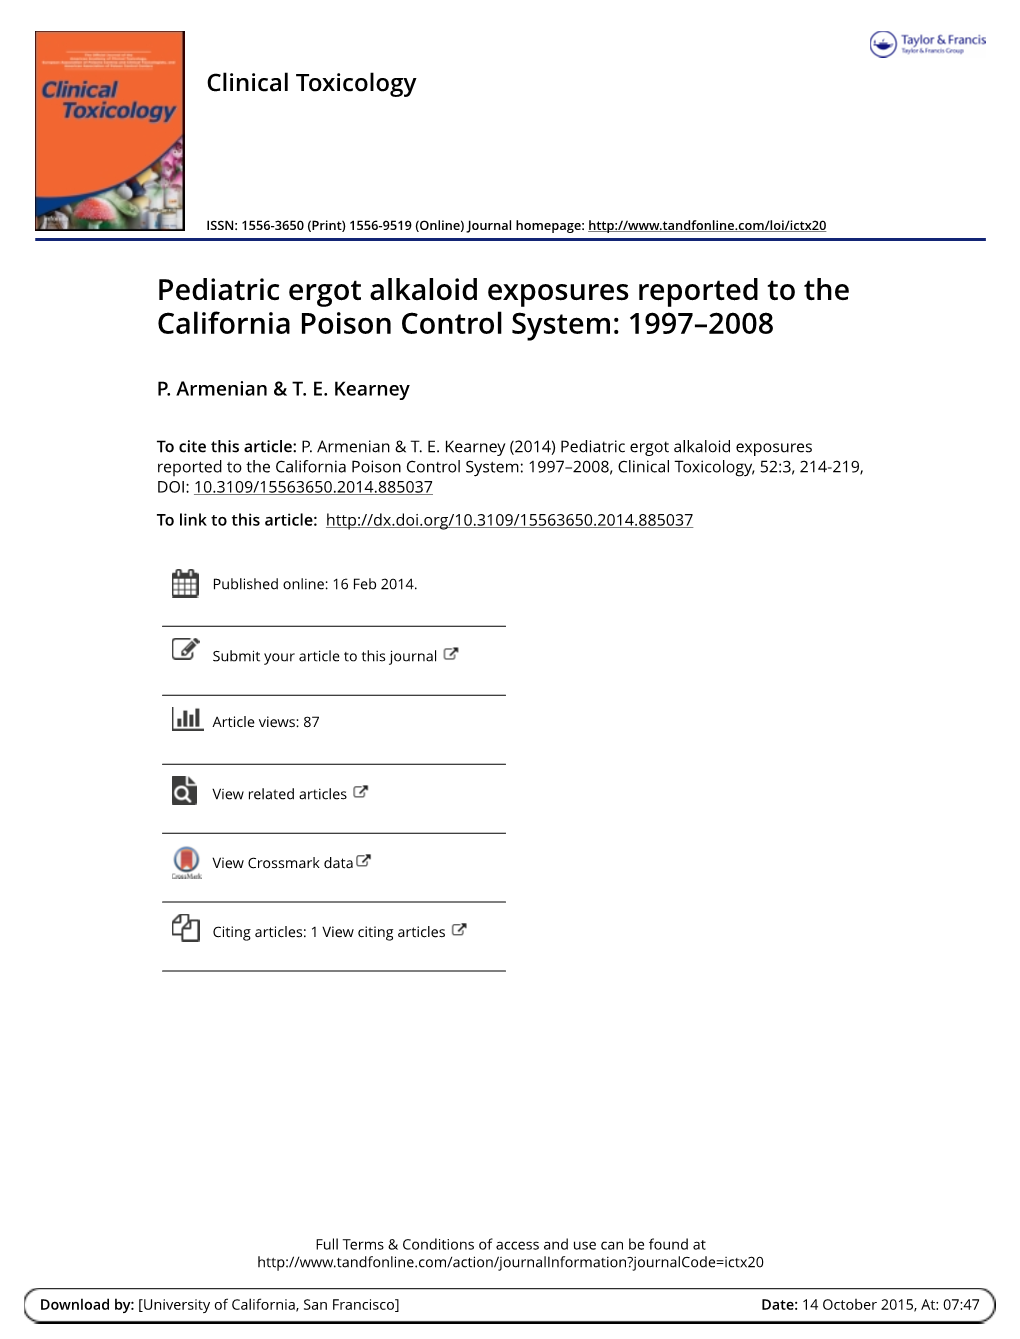 Pediatric Ergot Alkaloid Exposures Reported to the California Poison Control System: 1997–2008